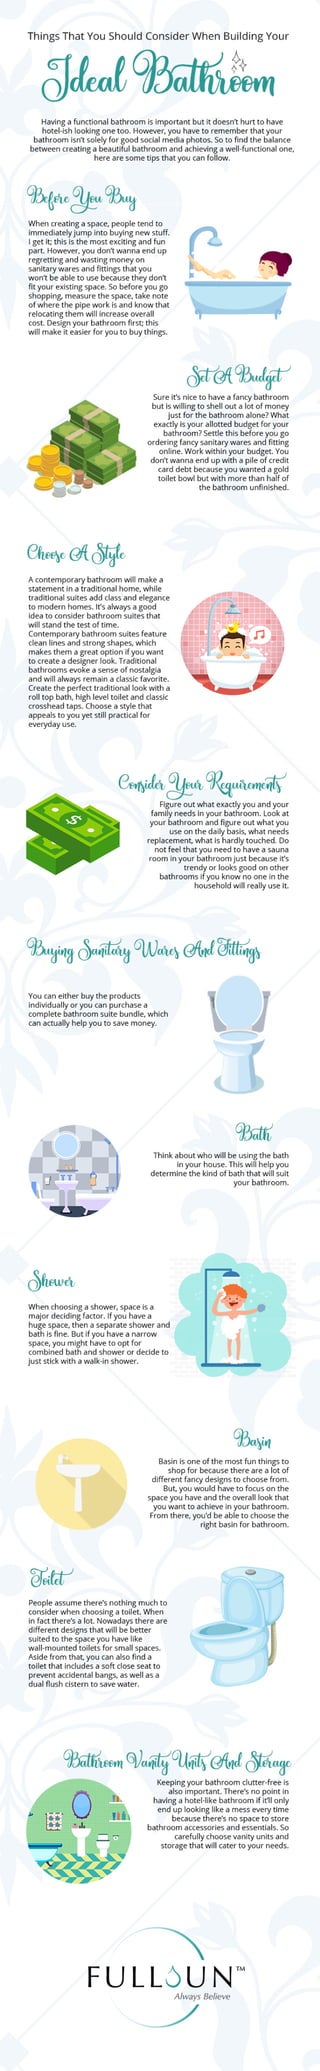 Things That You Should Consider When Building Your Ideal Bathroom